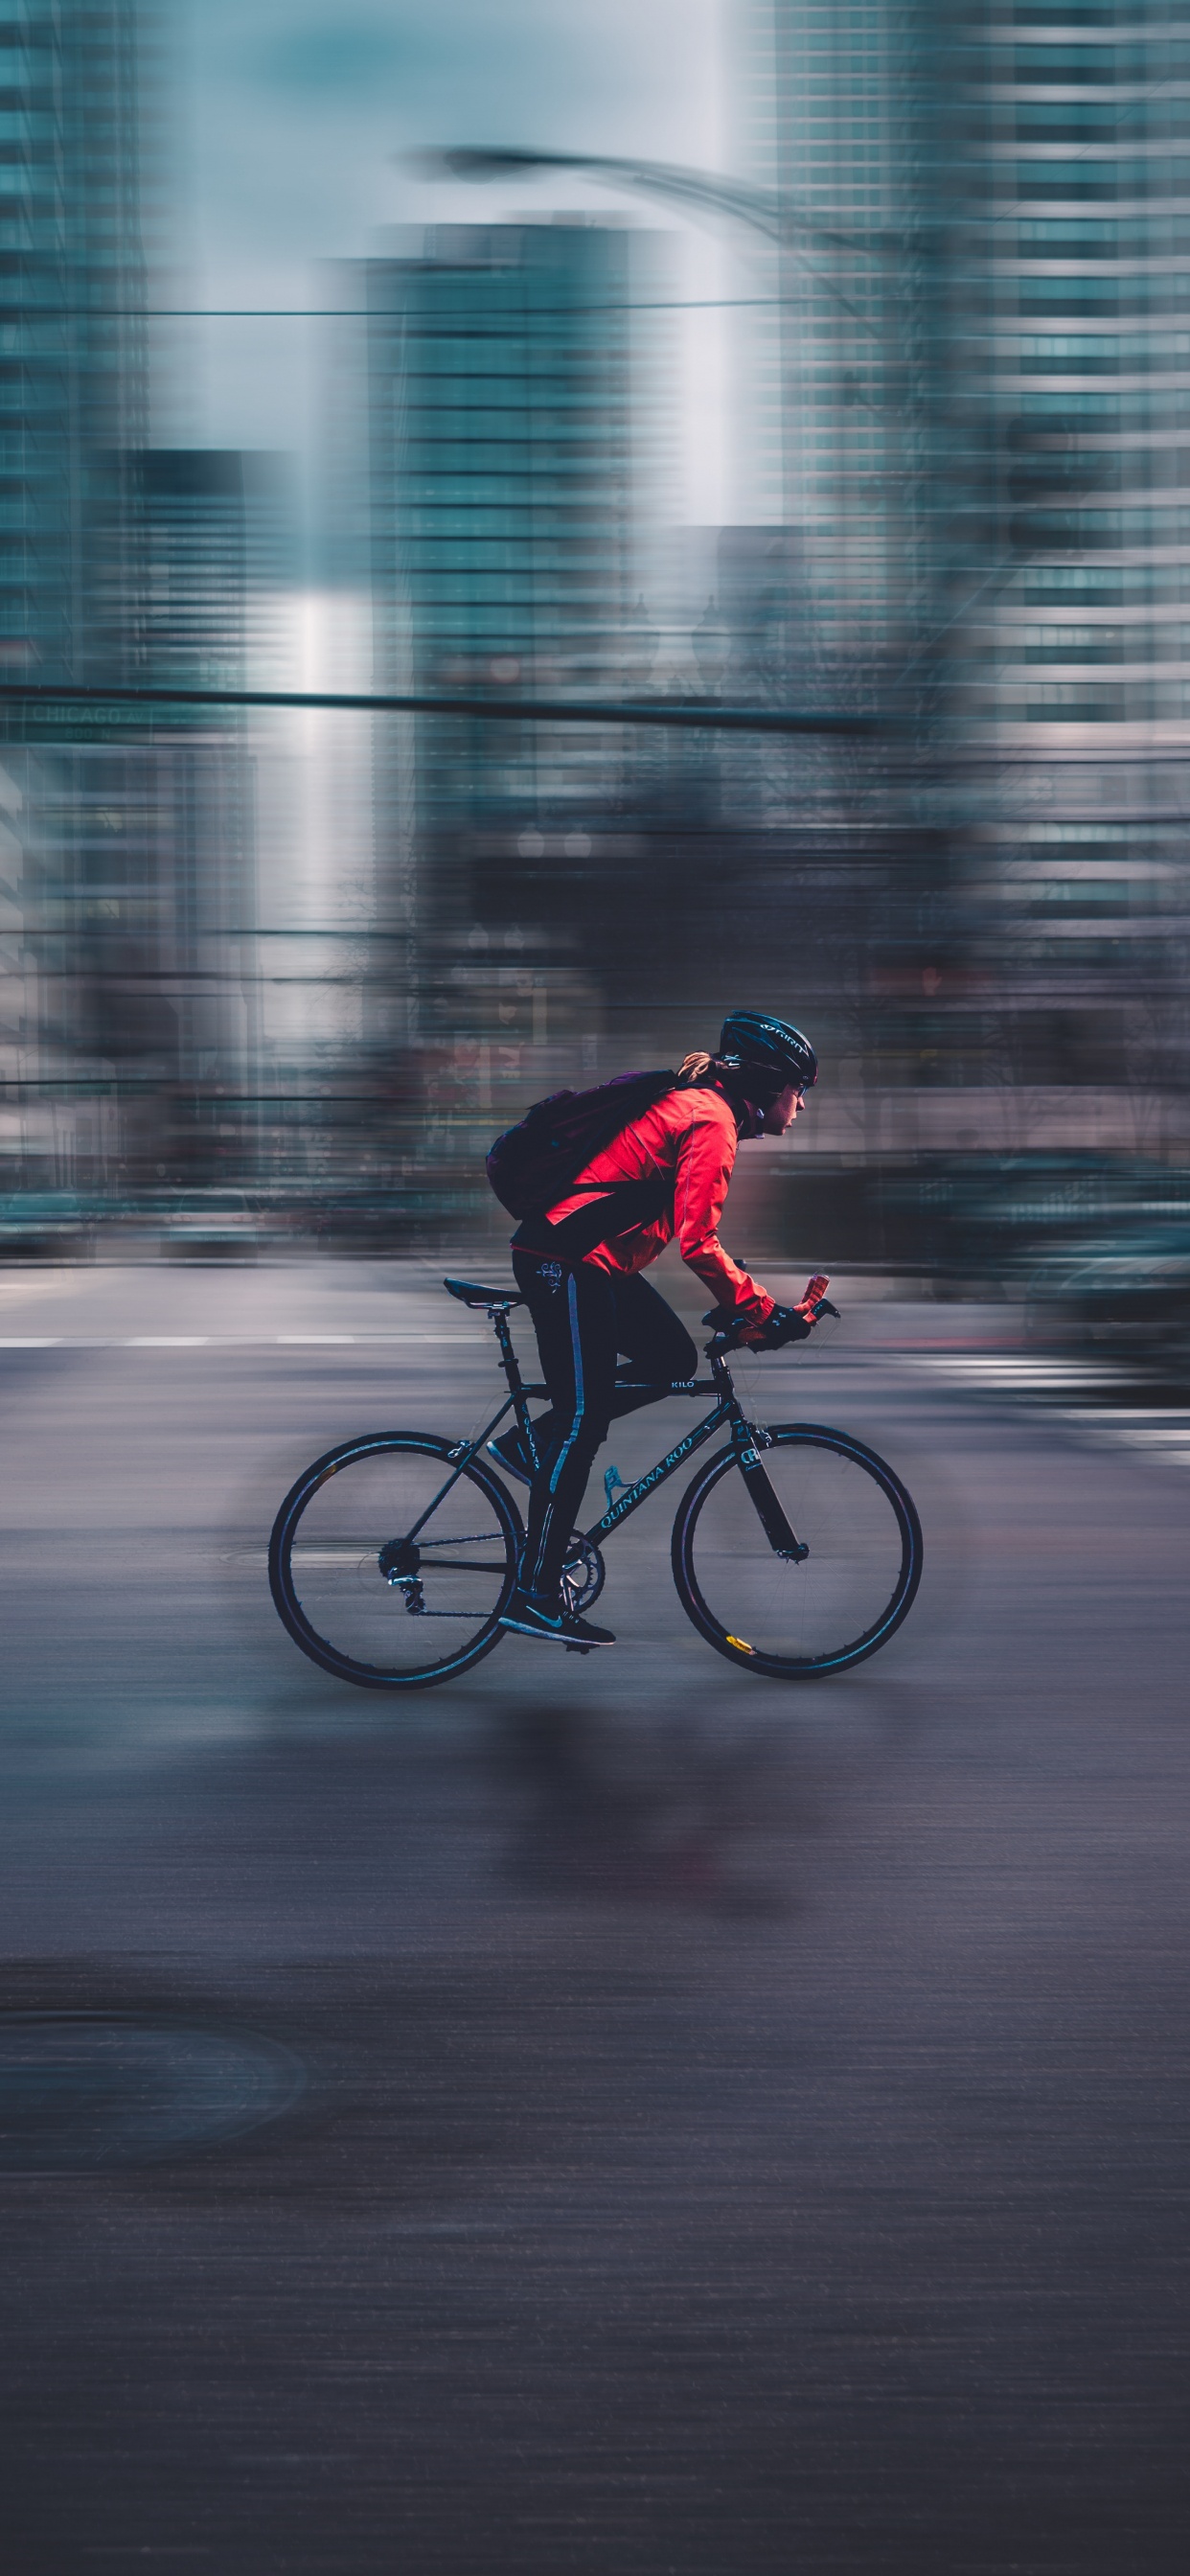 Man in Red Jacket Riding Bicycle Sur Route Pendant la Journée. Wallpaper in 1242x2688 Resolution